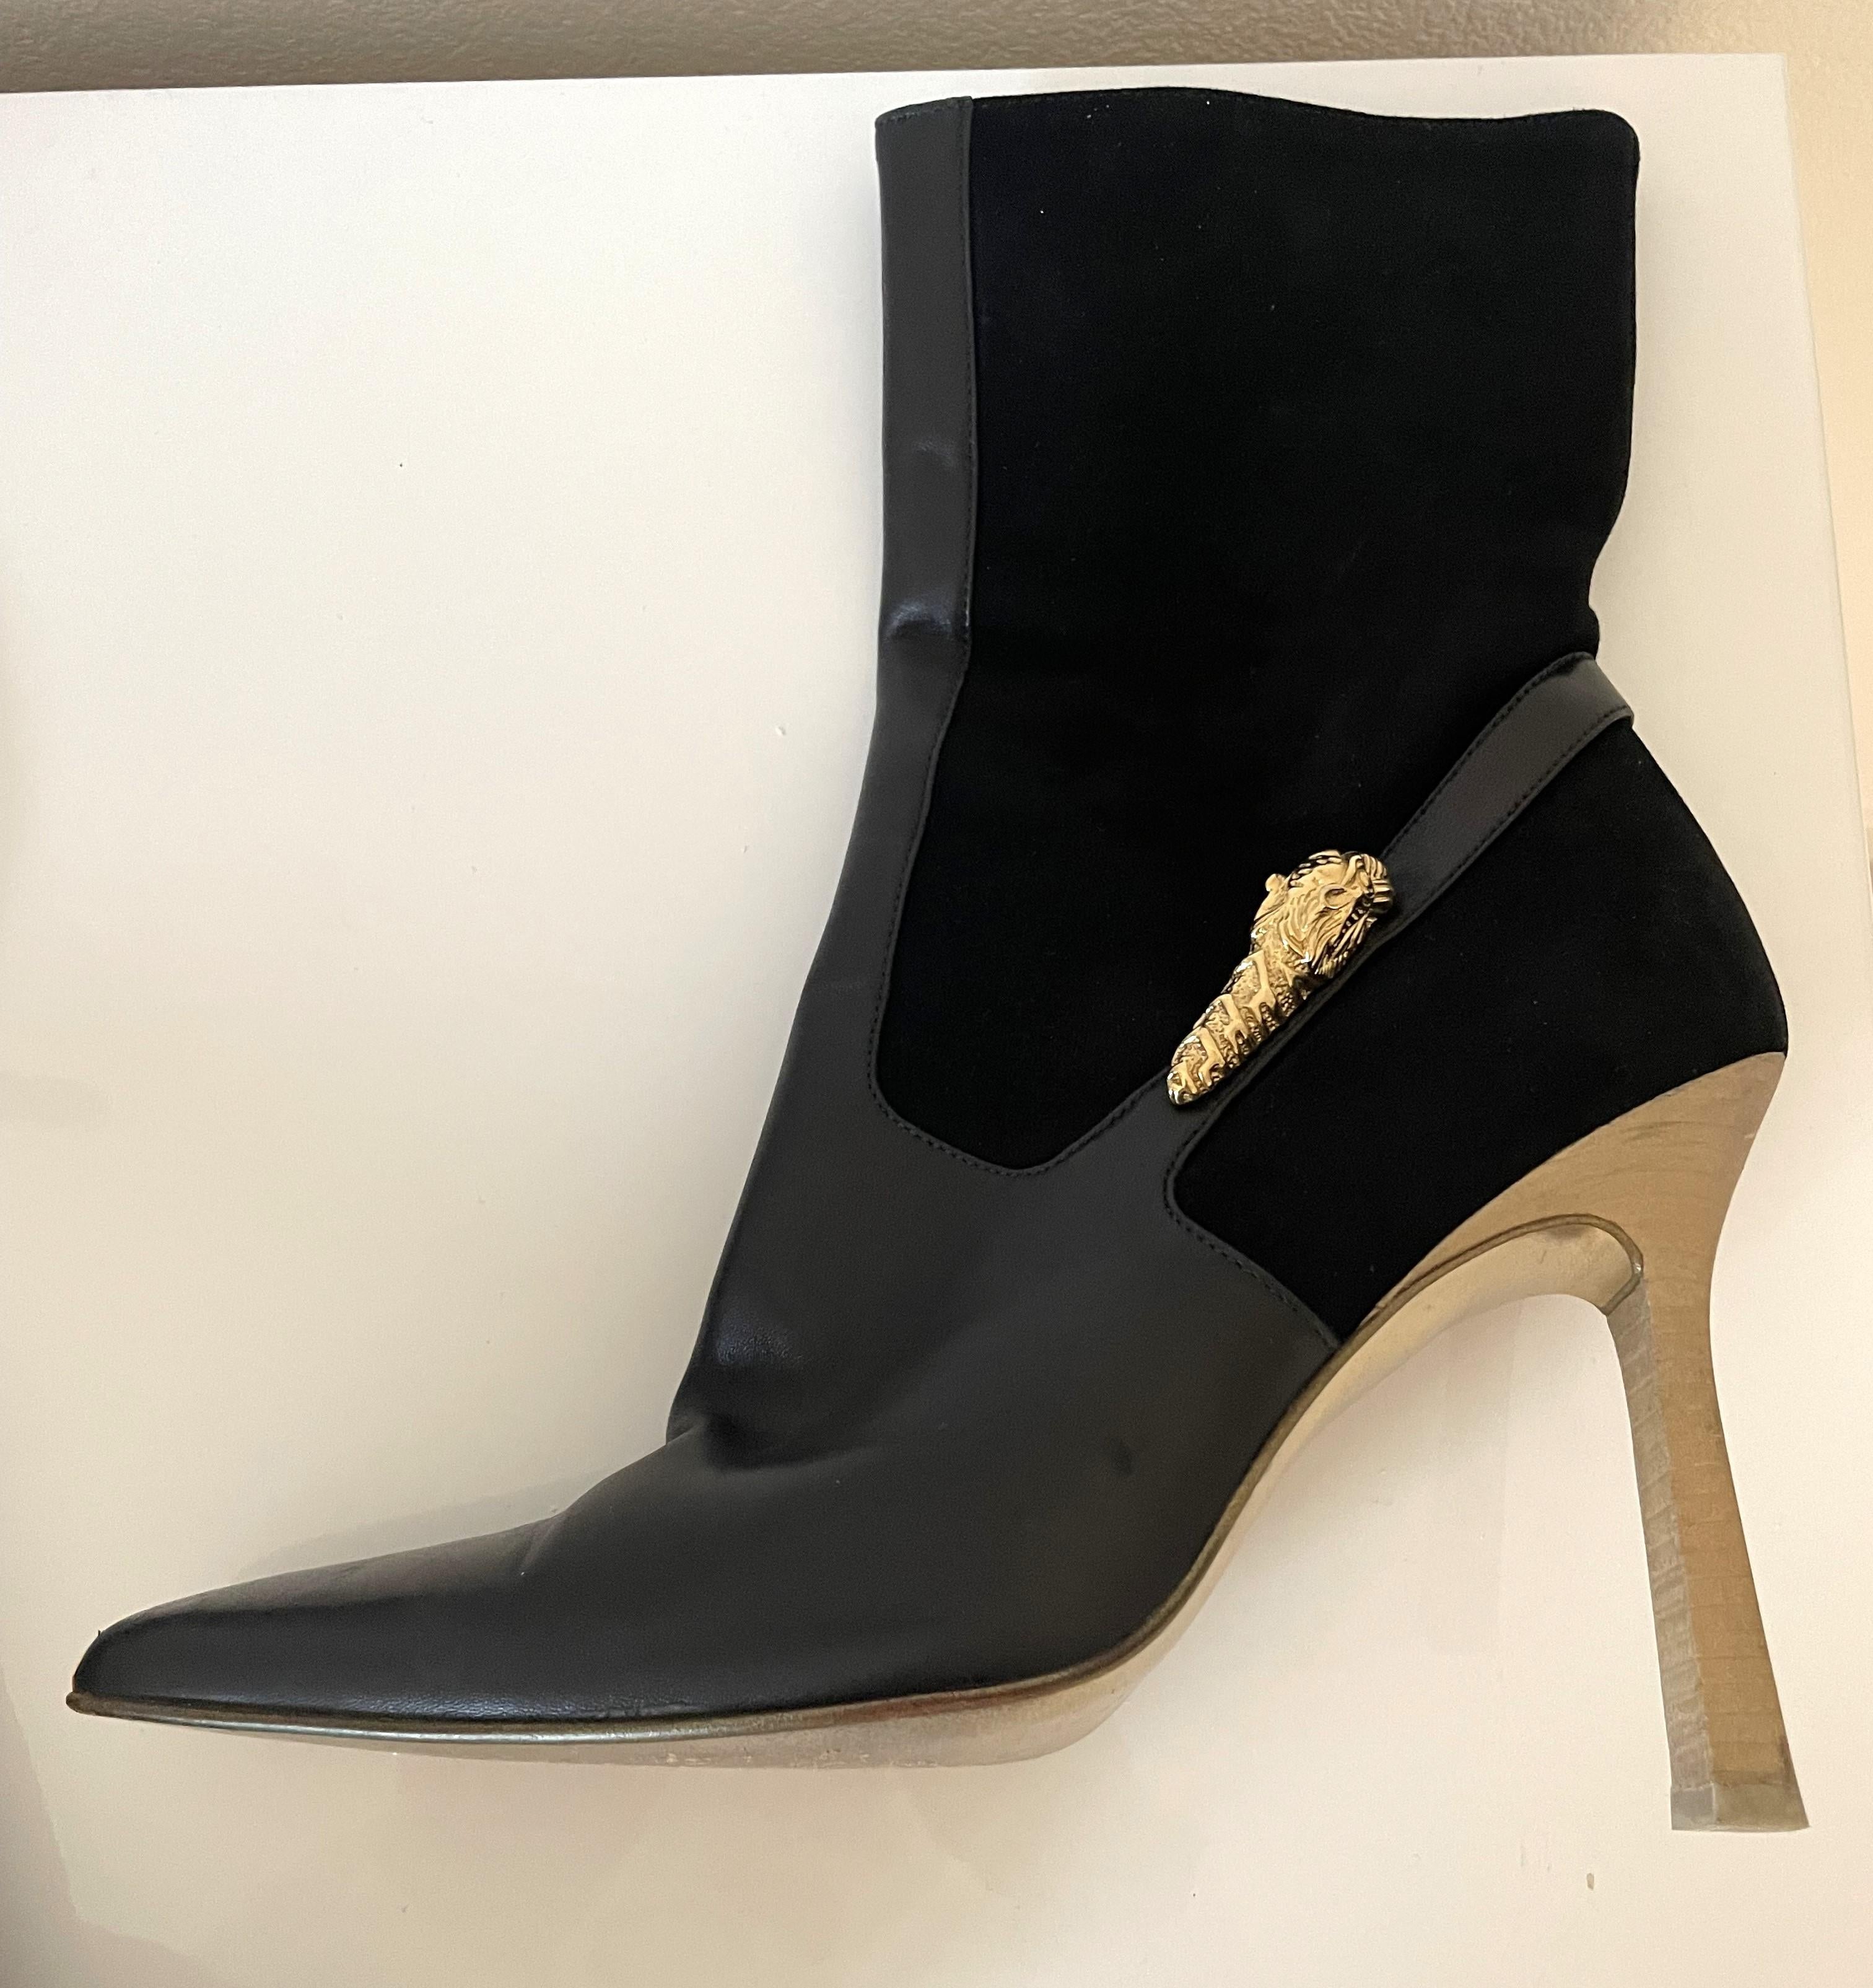 Gucci Rare Black Suede Leather High Heel Ankle Boots Gold Metal Panther For Sale 1